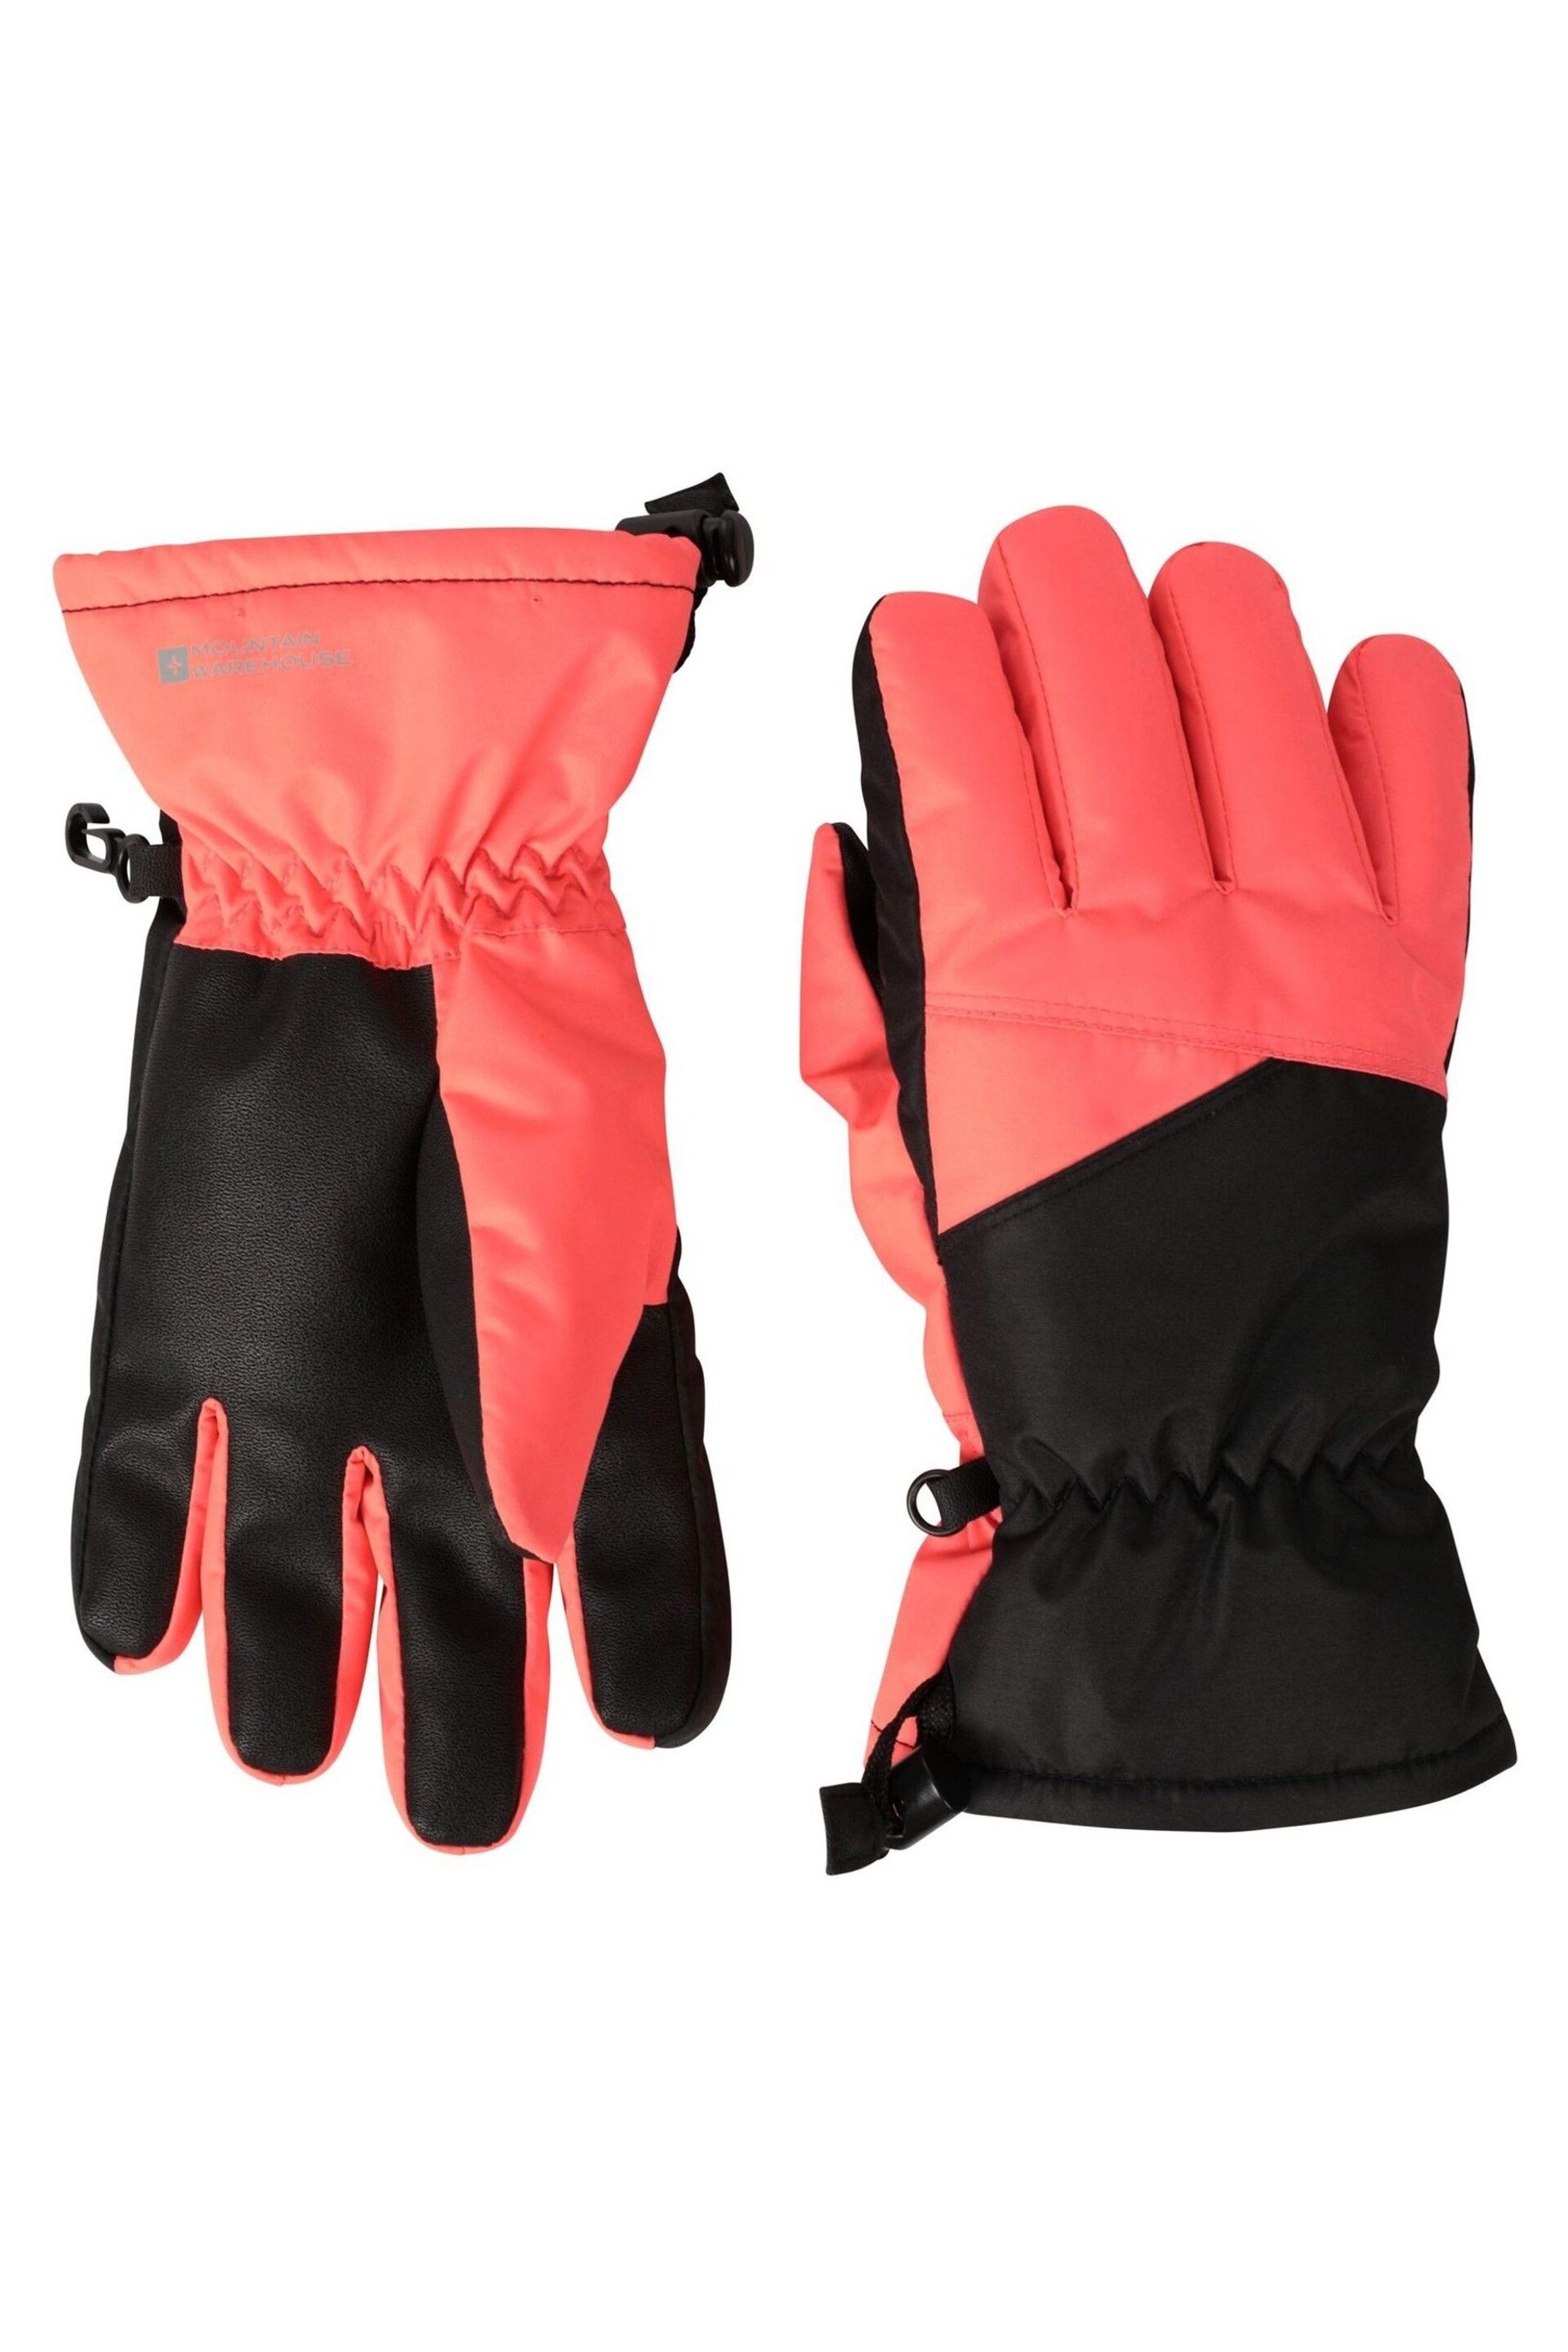 Mountain Warehouse Red Extreme Kids Waterproof Fleece Lined Ski Gloves - Image 1 of 6